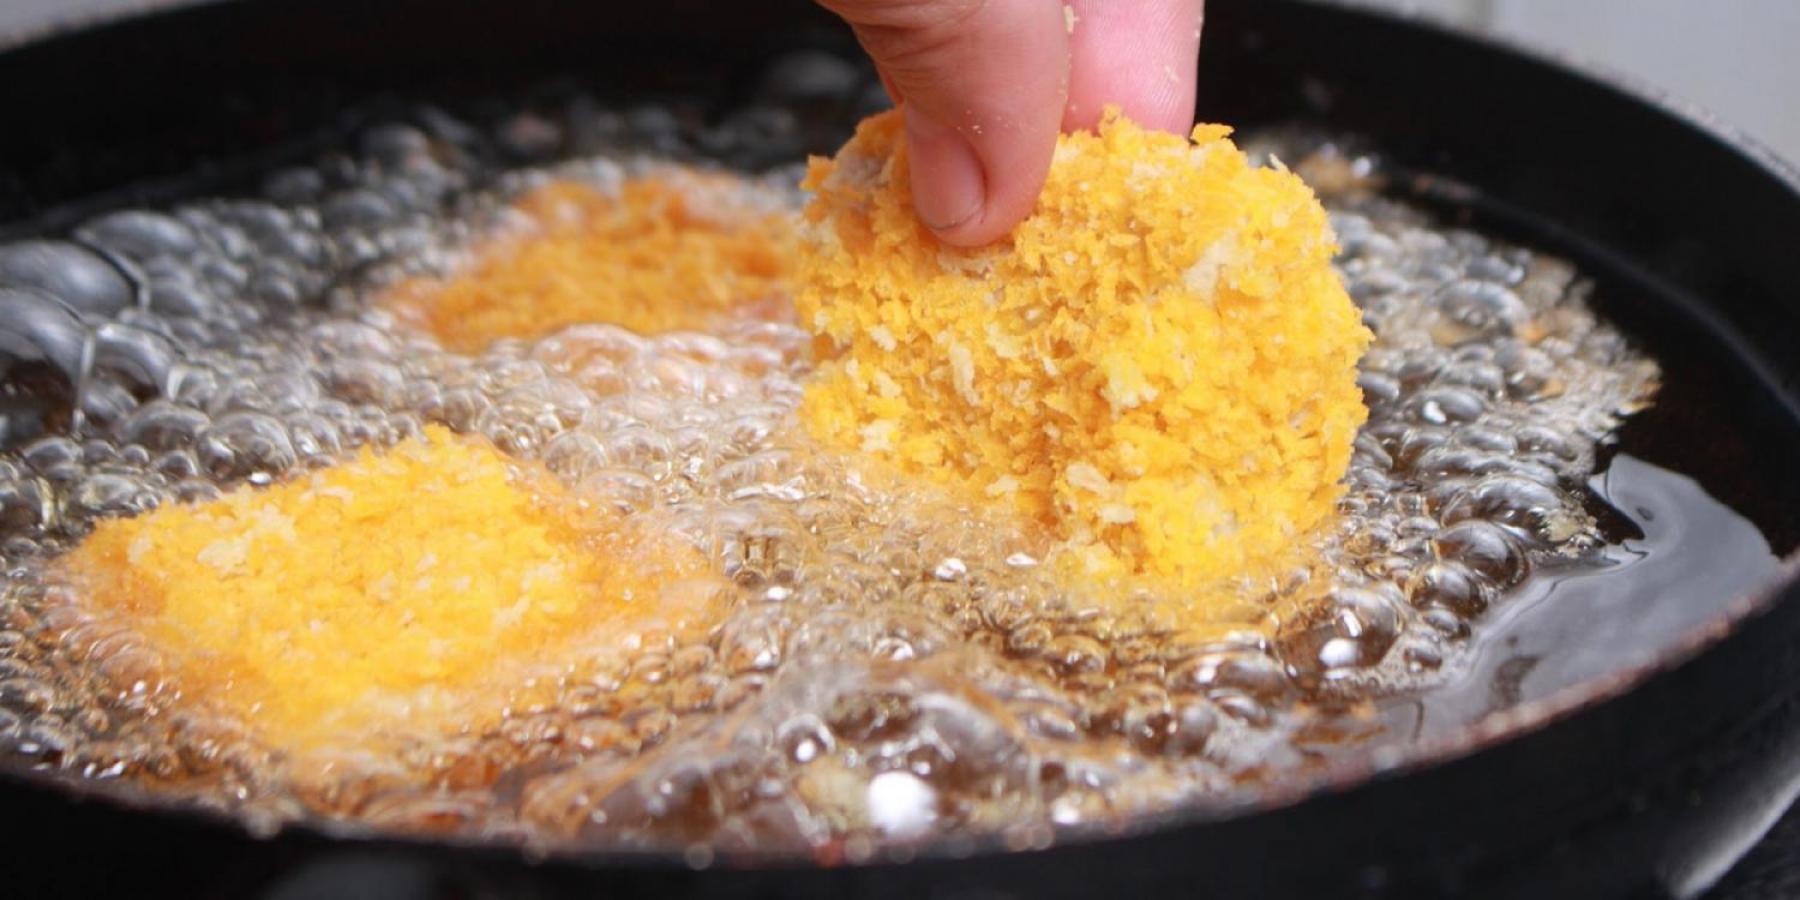 Ultra-processed foods being fried